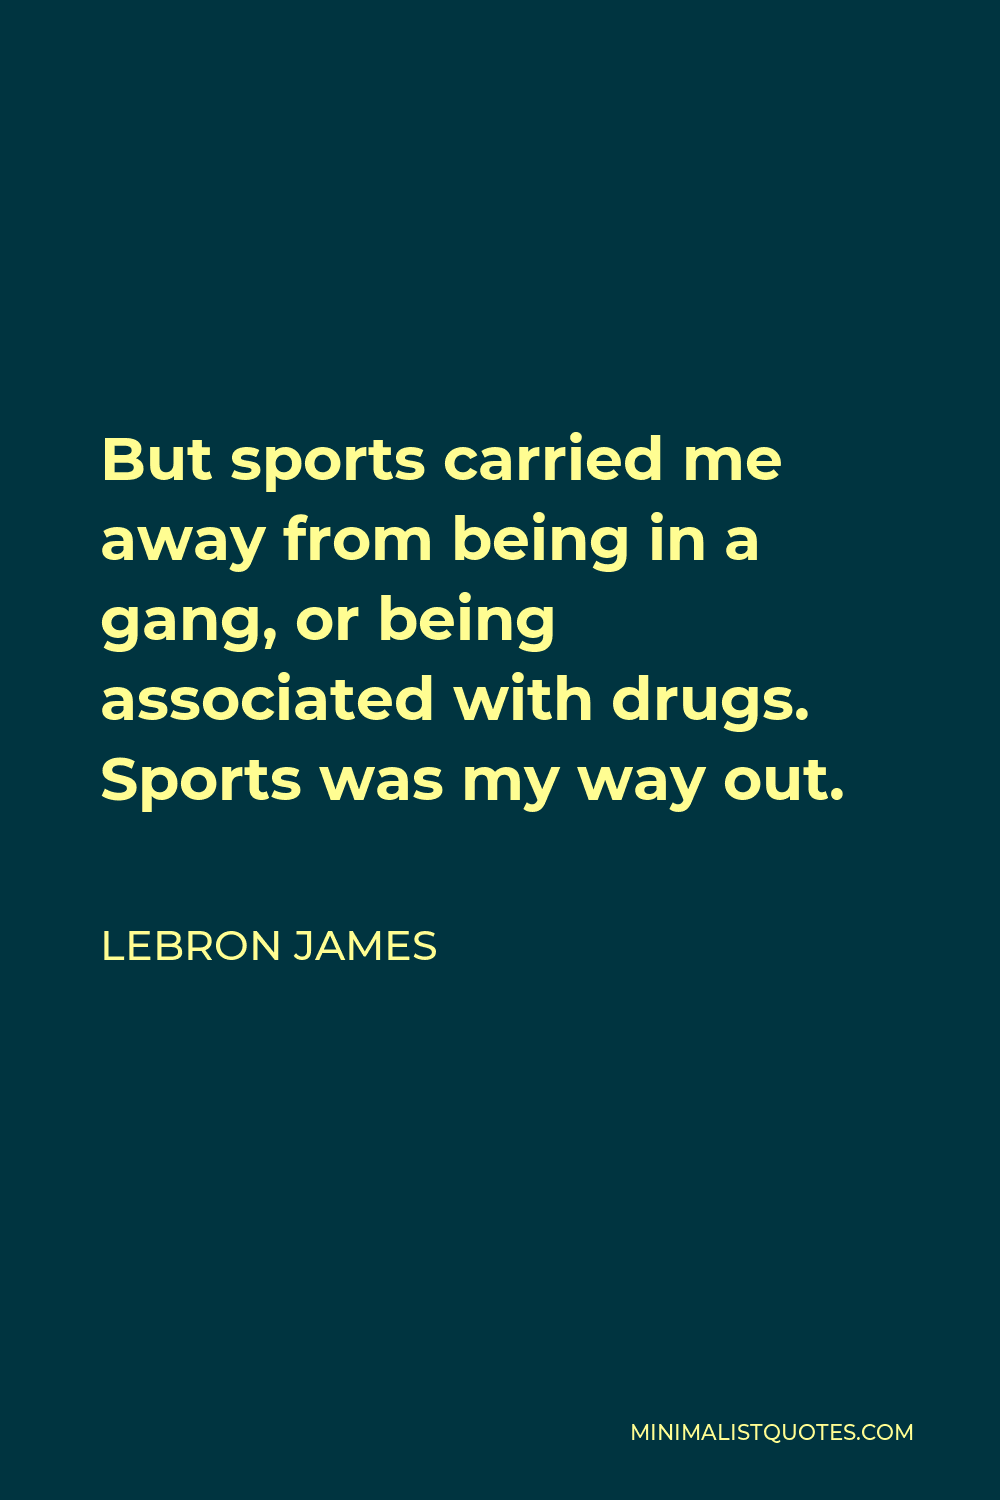 LeBron James Quote - But sports carried me away from being in a gang, or being associated with drugs. Sports was my way out.